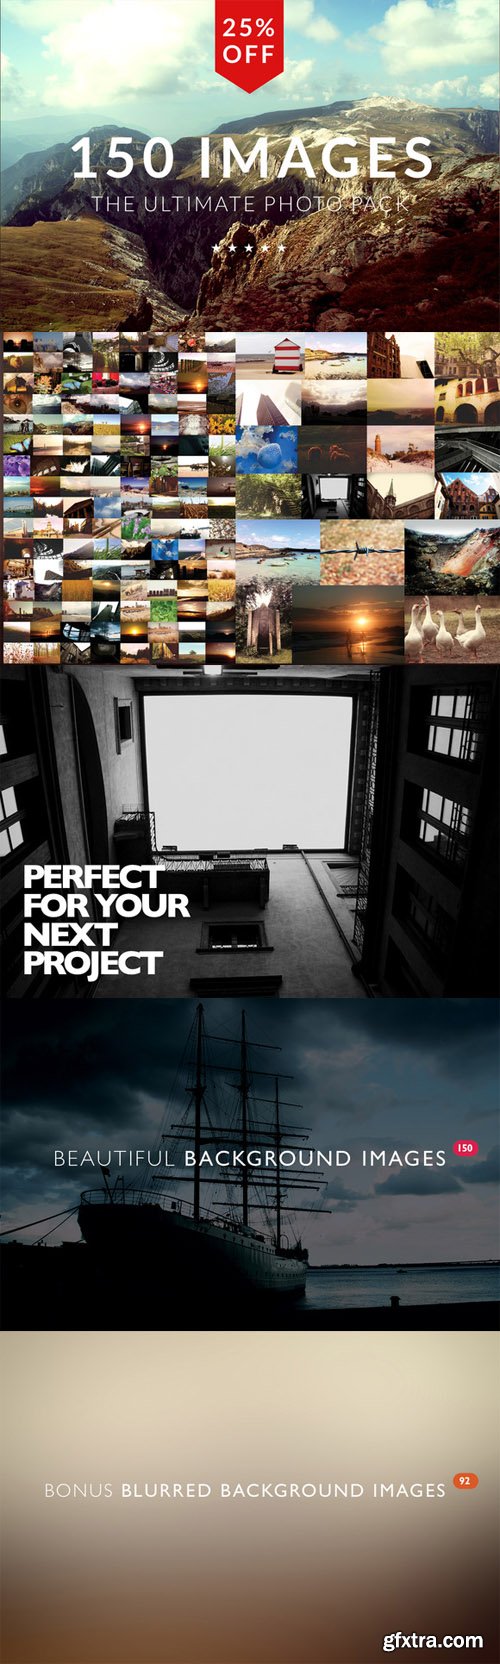 CreativeMarket - The Ultimate Photo Pack (150 images) 53224